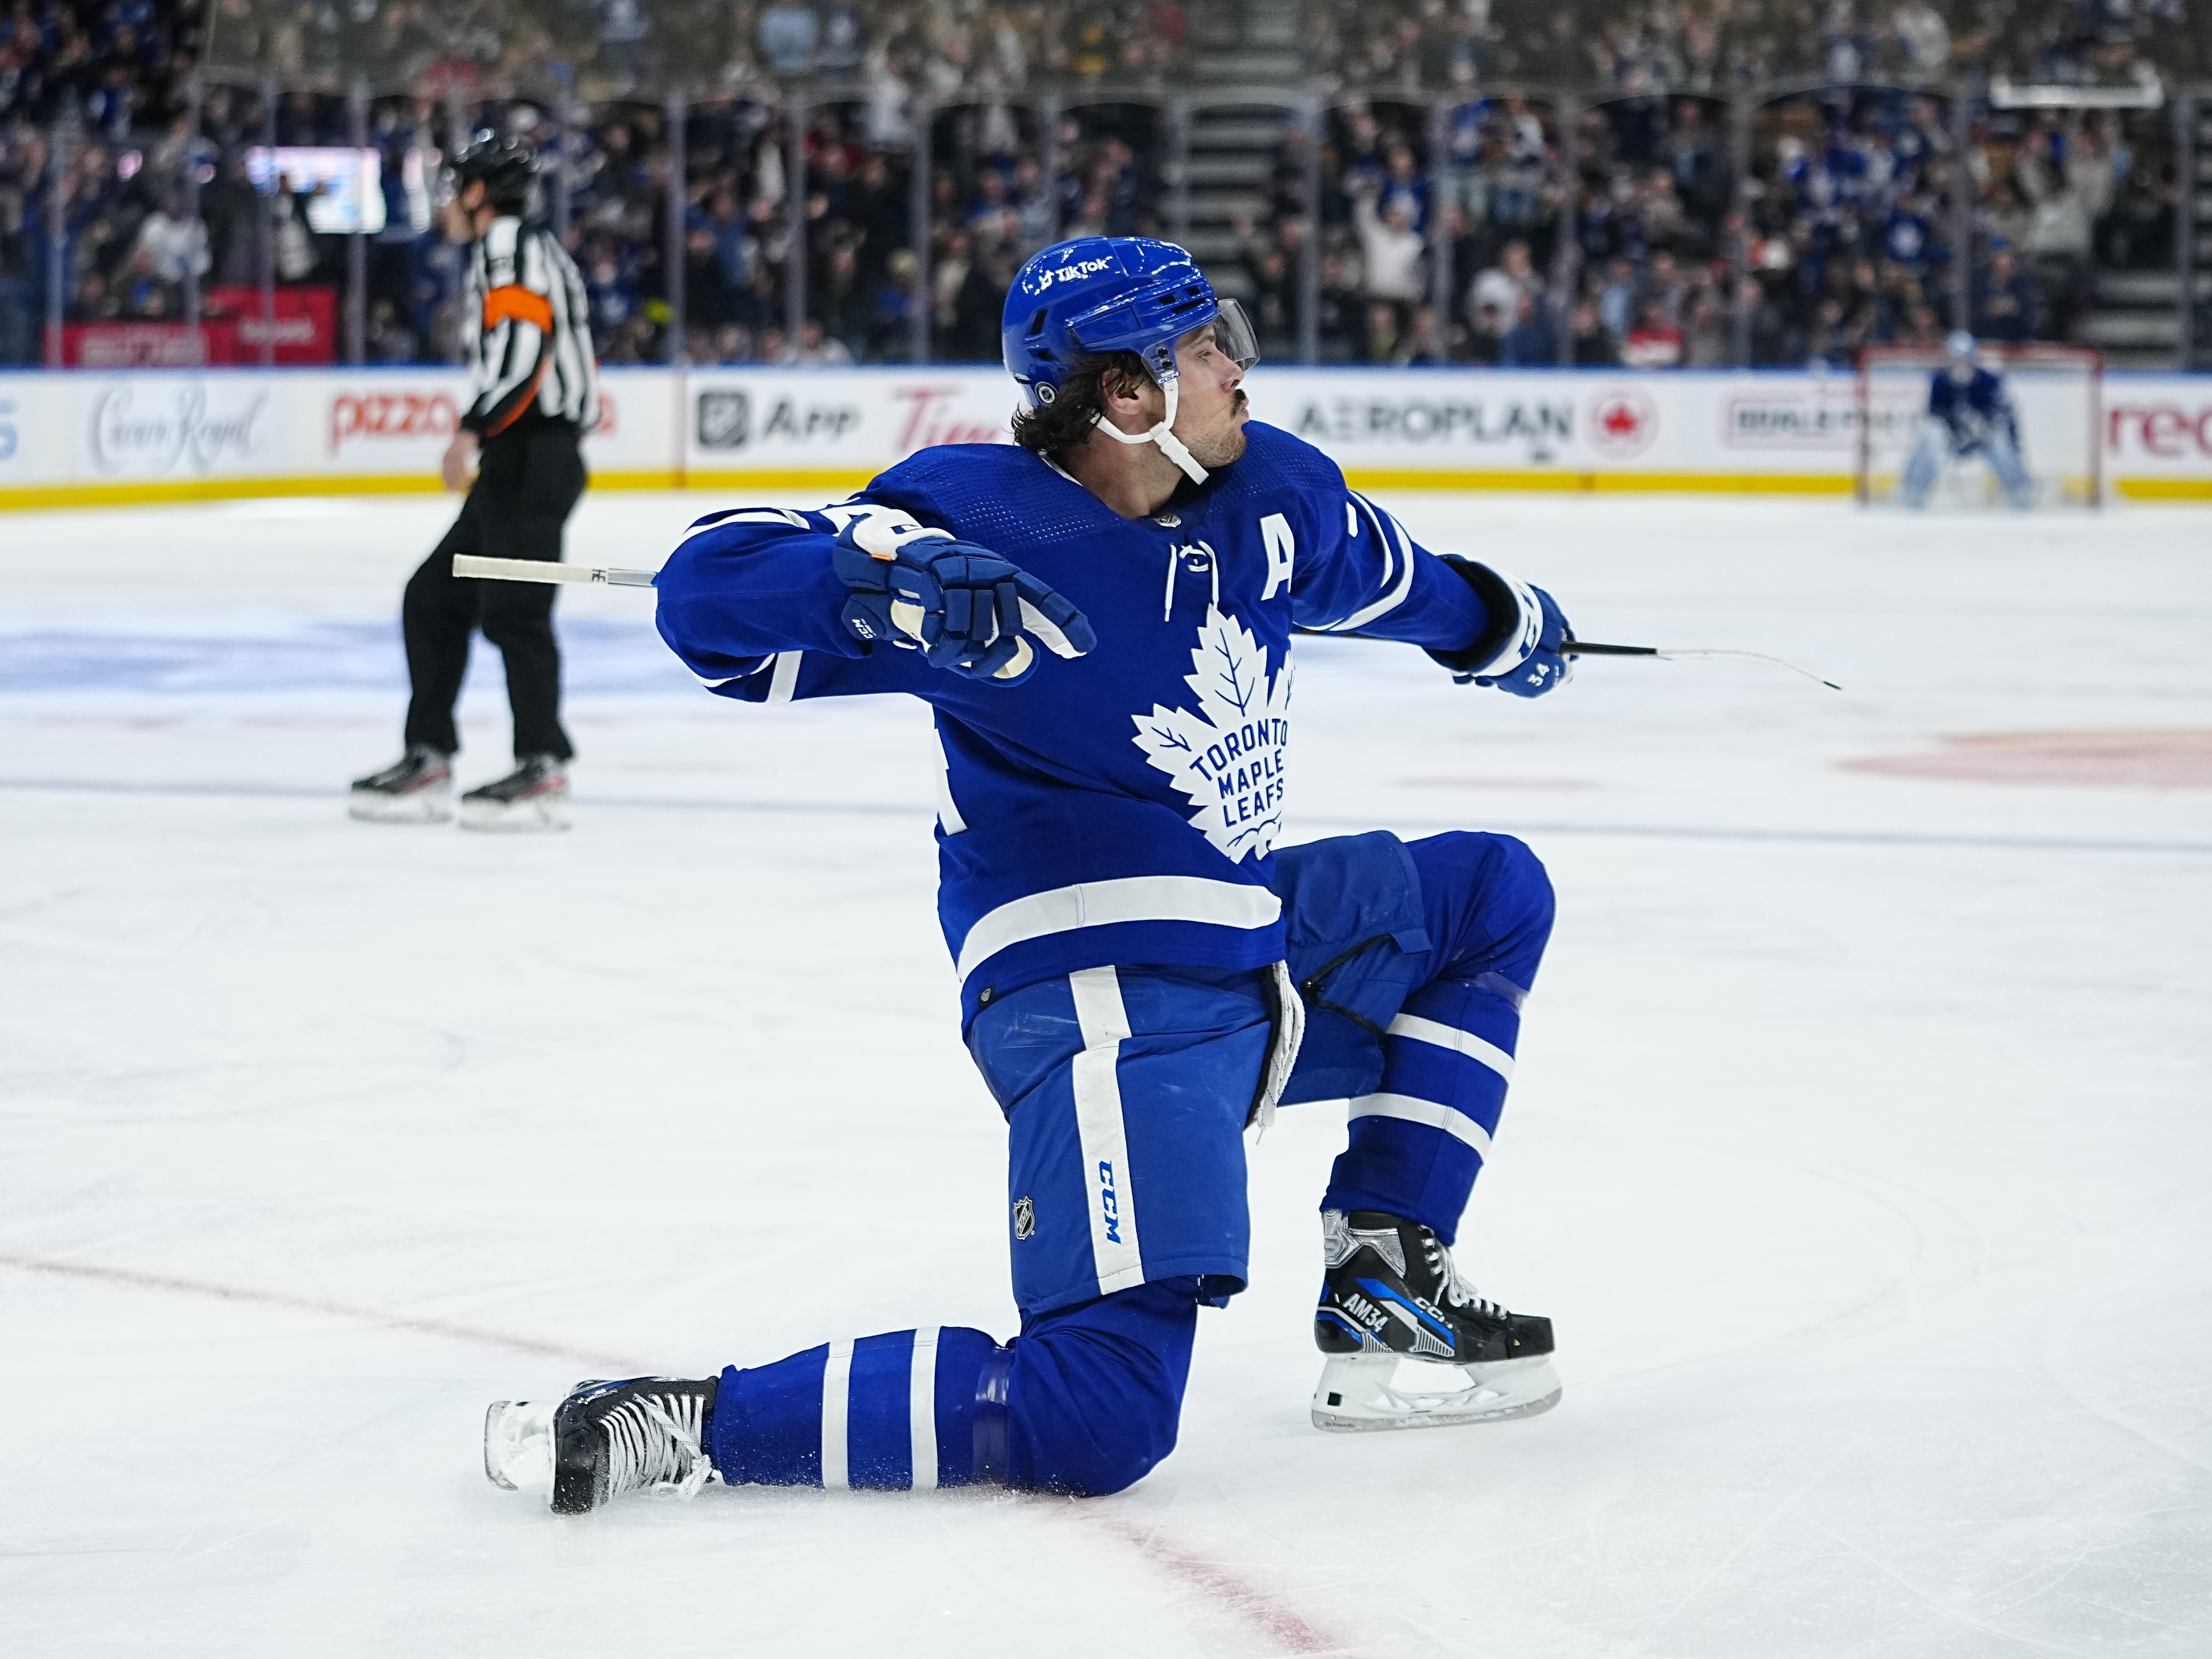 NHL Playoffs odds, expert picks: Predictions for Maple Leafs vs